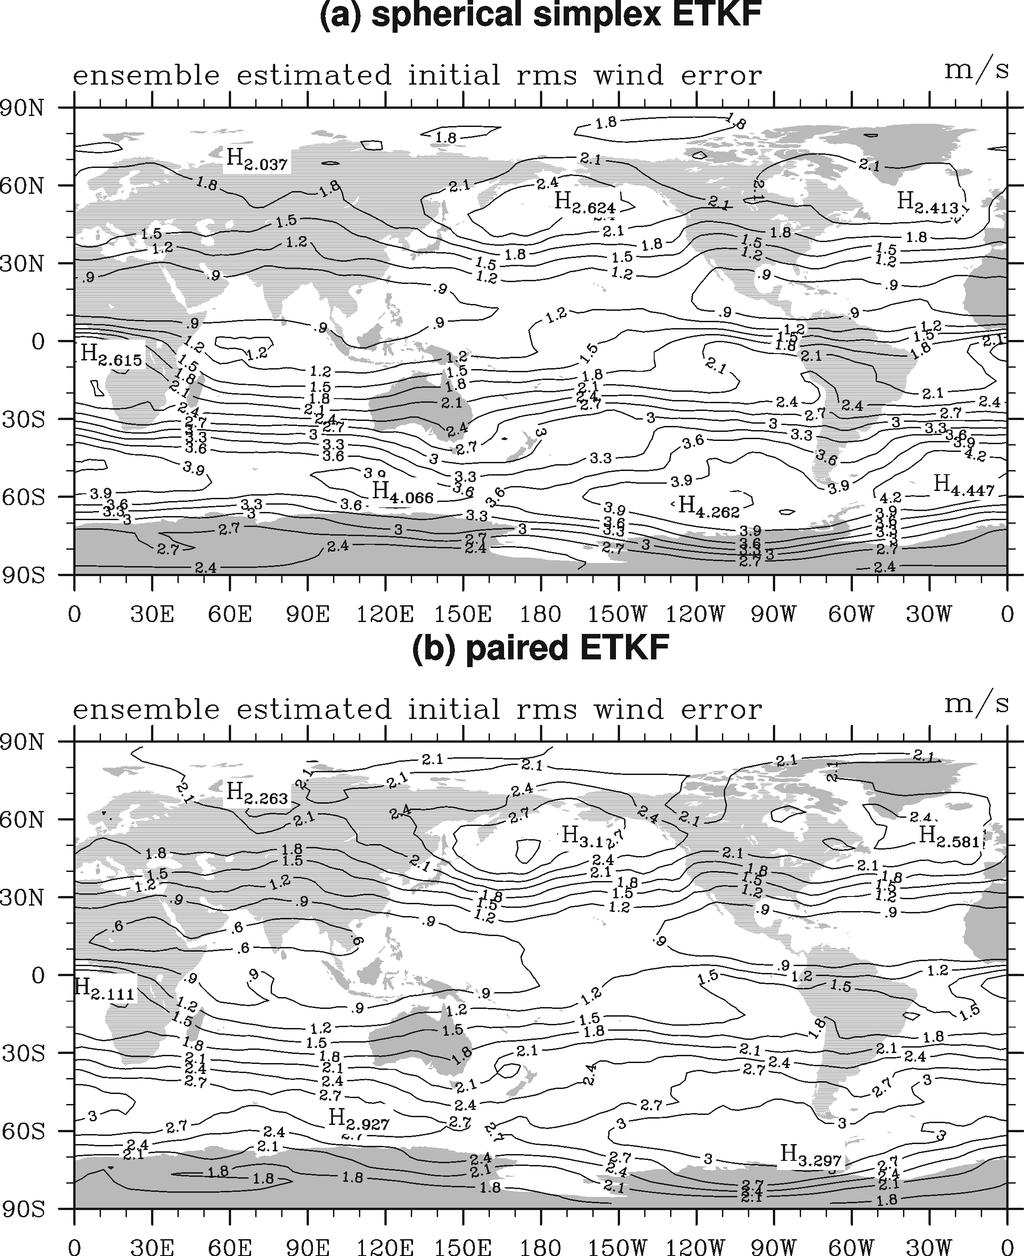 mean eigenvalues 900 800 700 600 500 400 300 200 100 0 paired ETKF spherical simplex ETKF 1 2 3 4 5 6 7 8 9 10 11 12 13 14 15 eigenvector number geographical variations of observations. Figure.